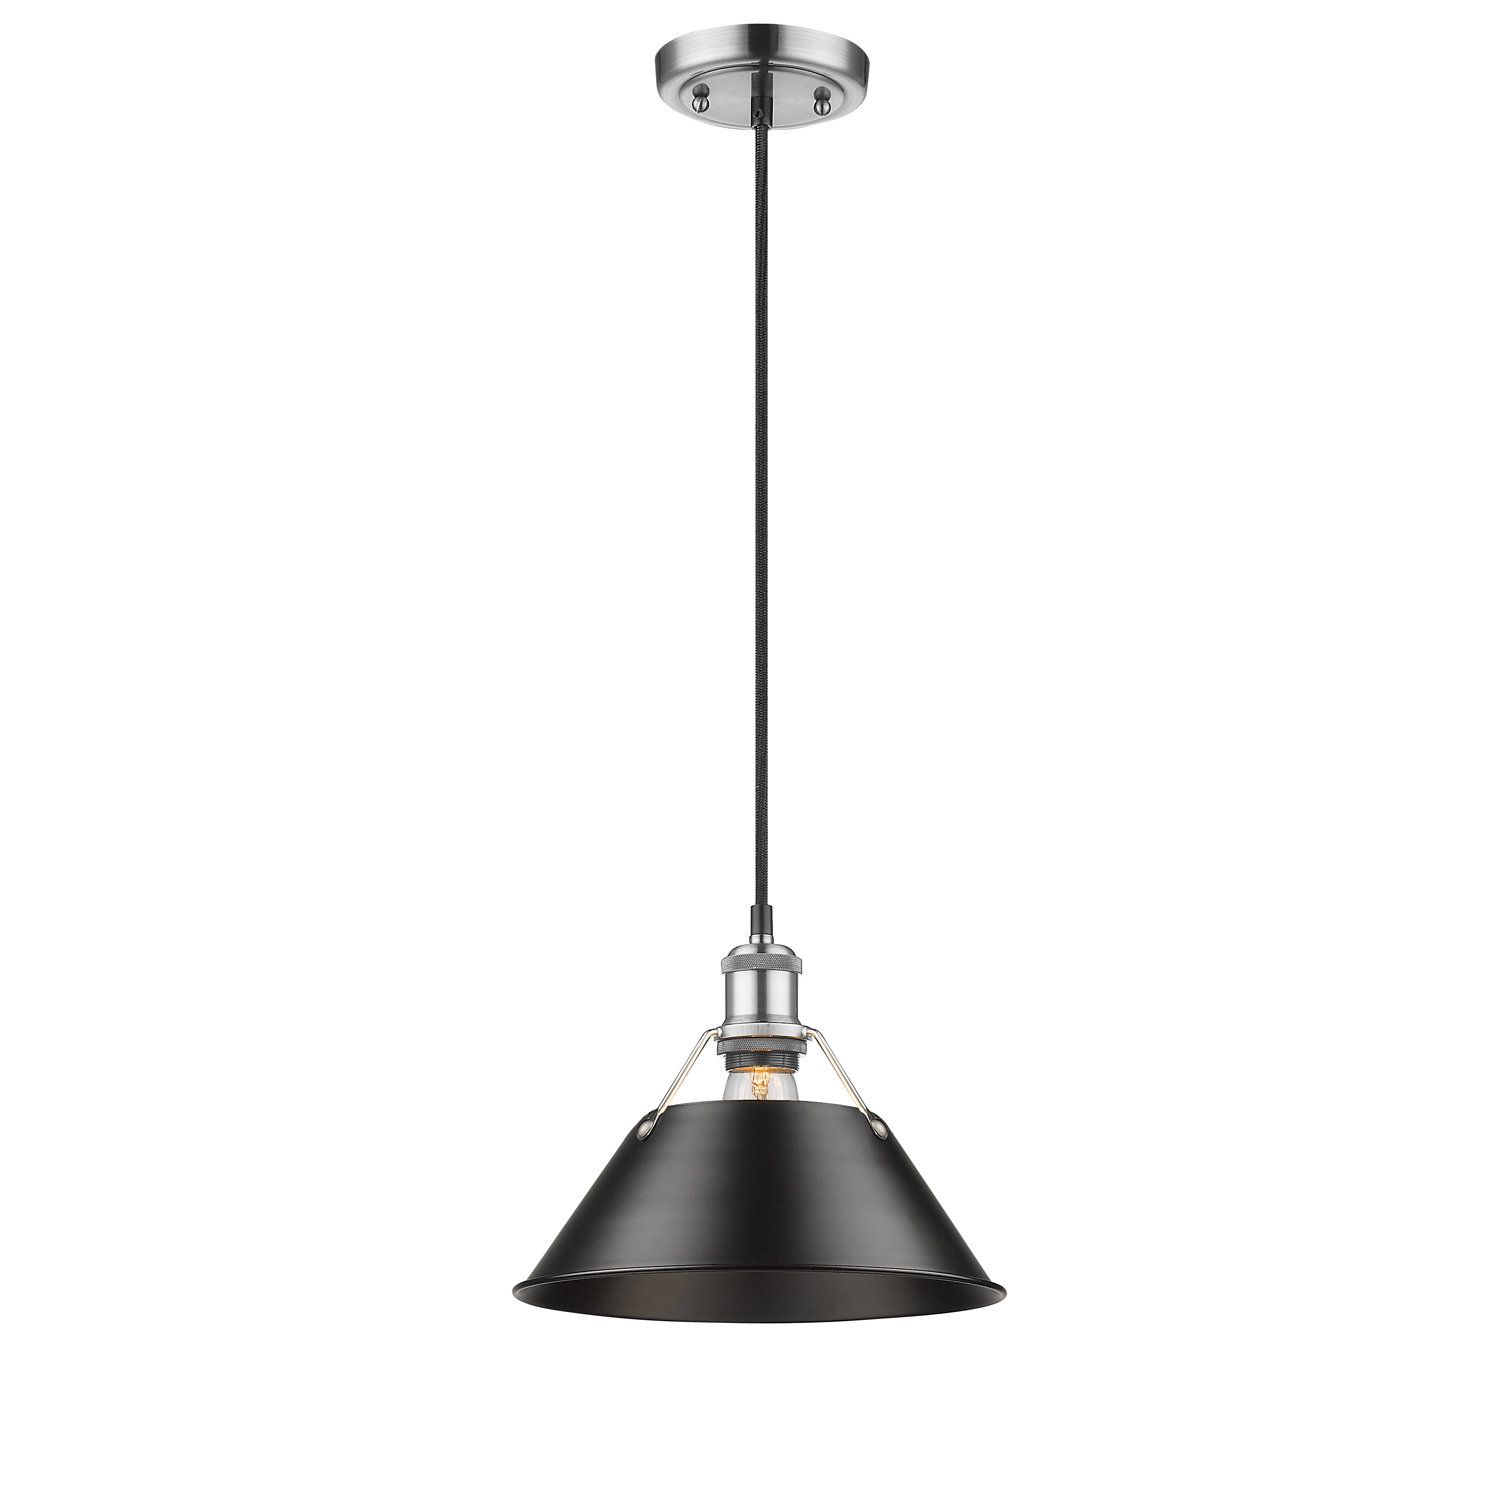 Weatherford 1 Light Single Cone Pendant Intended For Gattis 1 Light Dome Pendants (View 26 of 30)